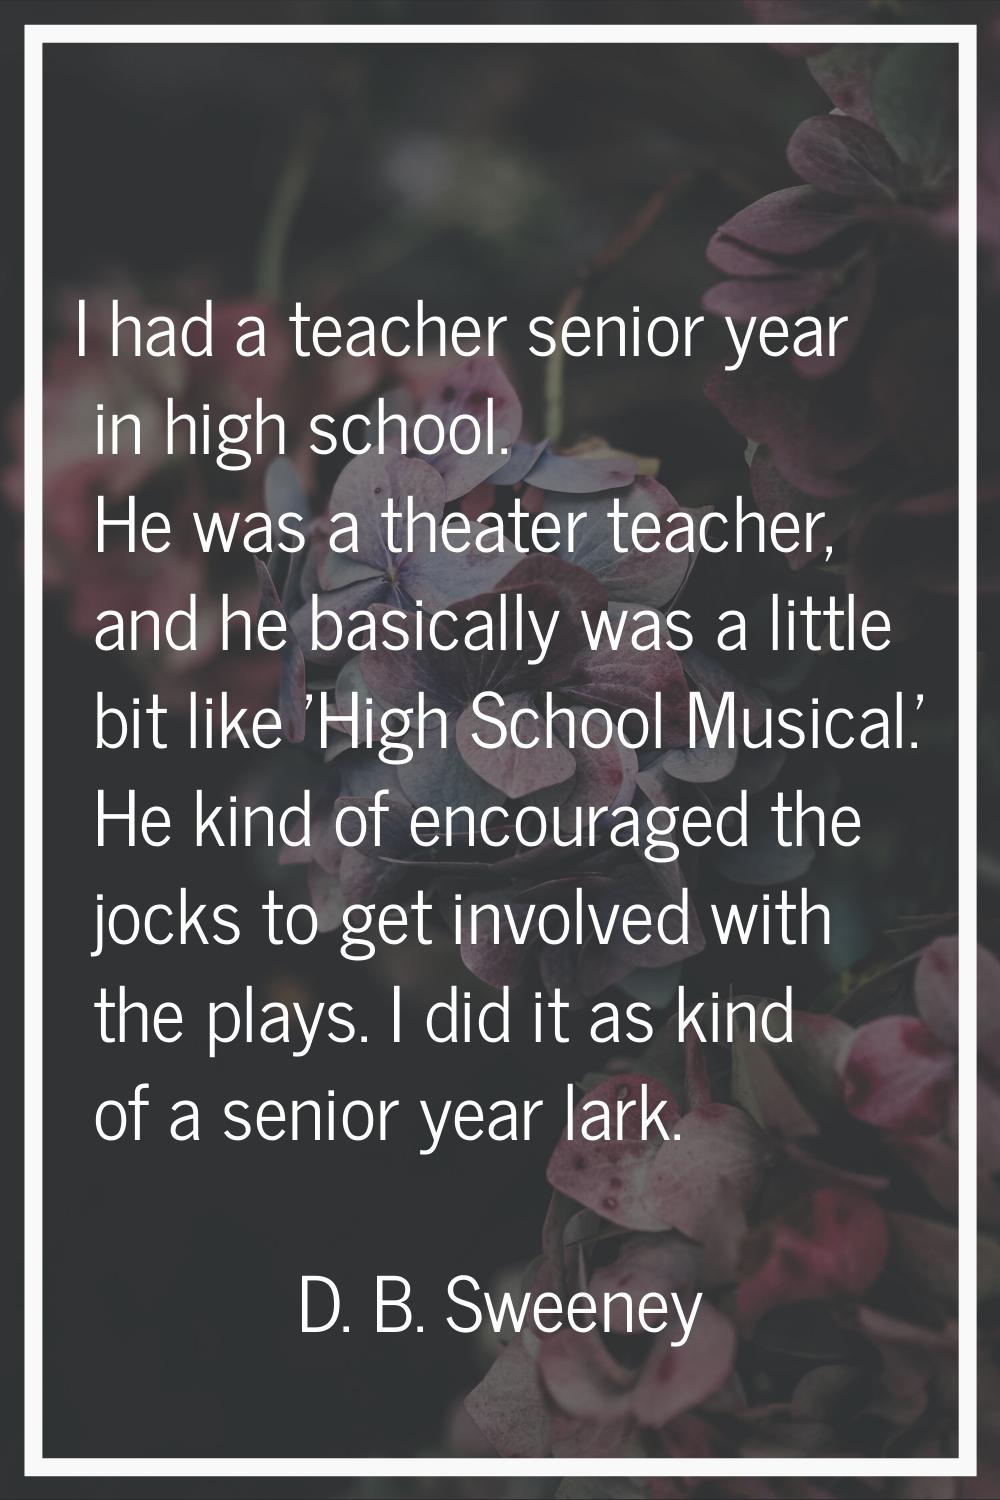 I had a teacher senior year in high school. He was a theater teacher, and he basically was a little